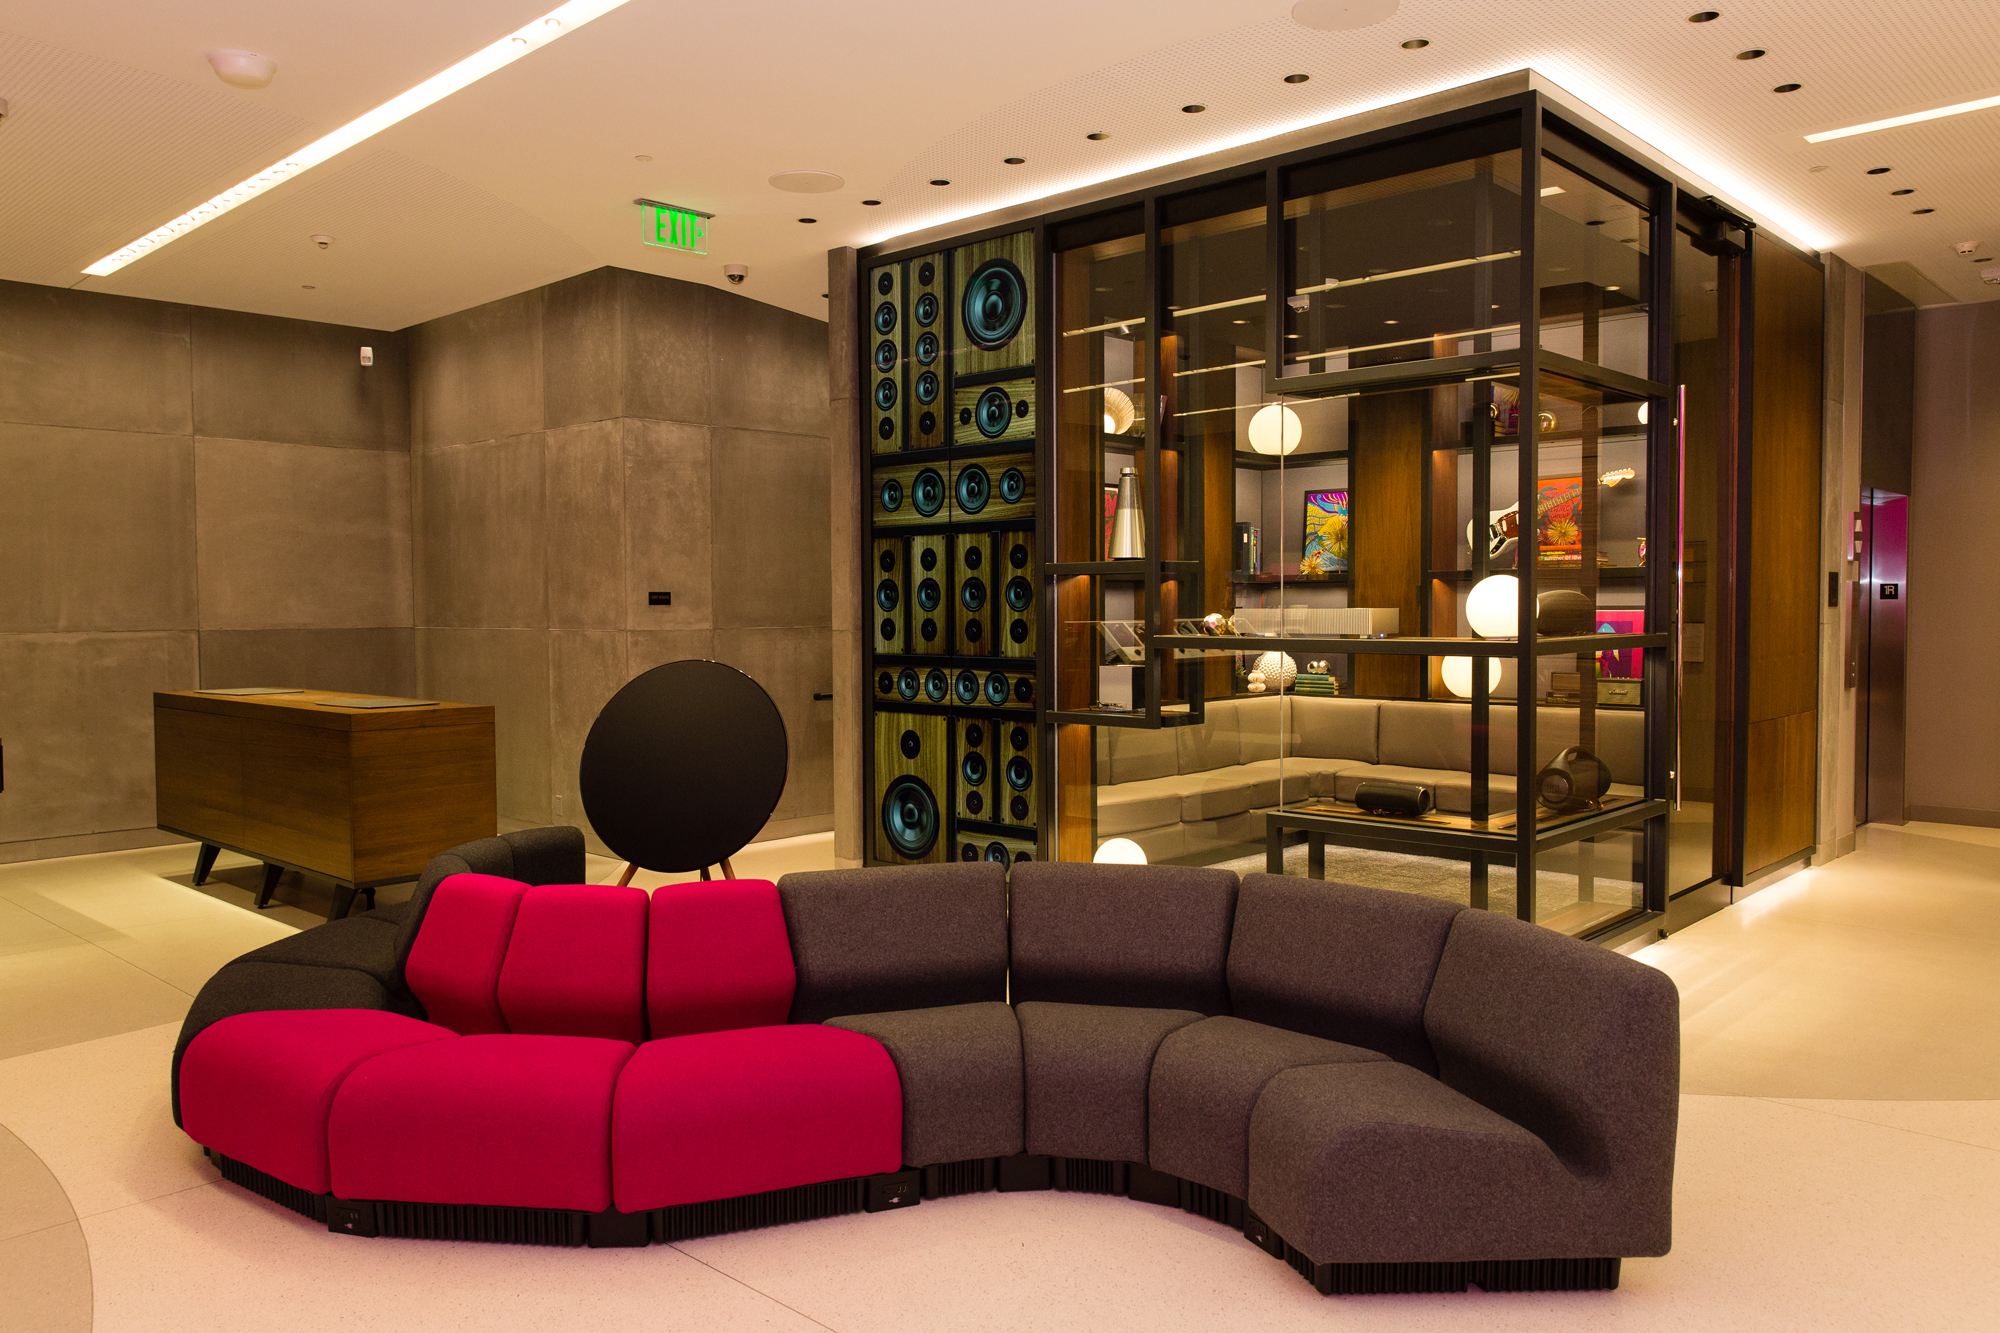 T-Mobile Signature Store, San Francisco, CA - constructed by Retail Construction Services, Inc.